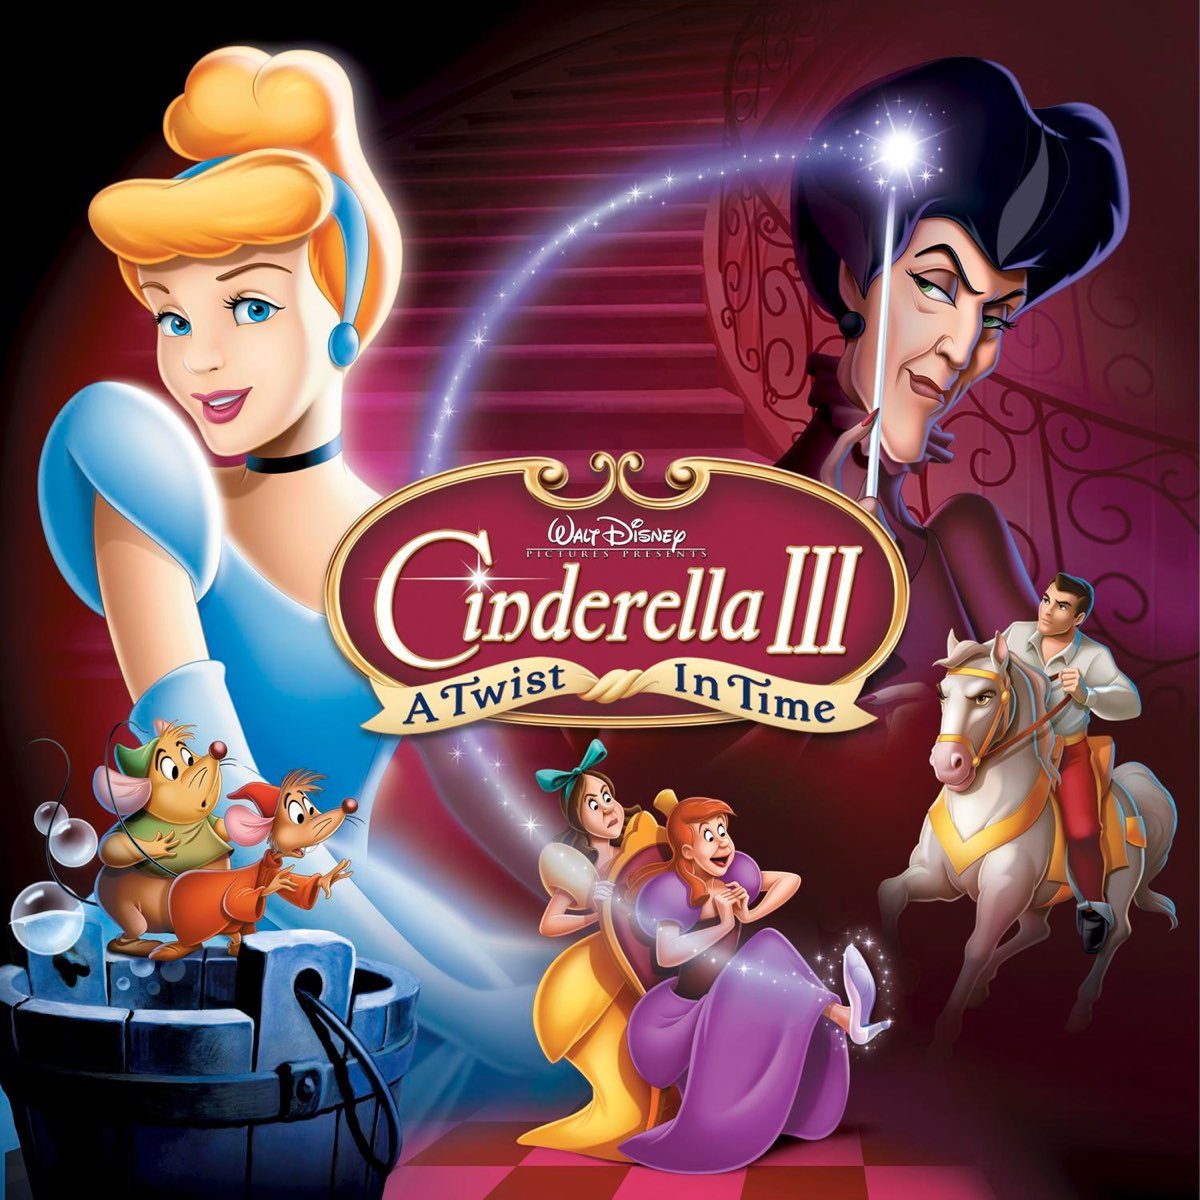 Cinderella a Twist In Time by Various Artists on iTunes